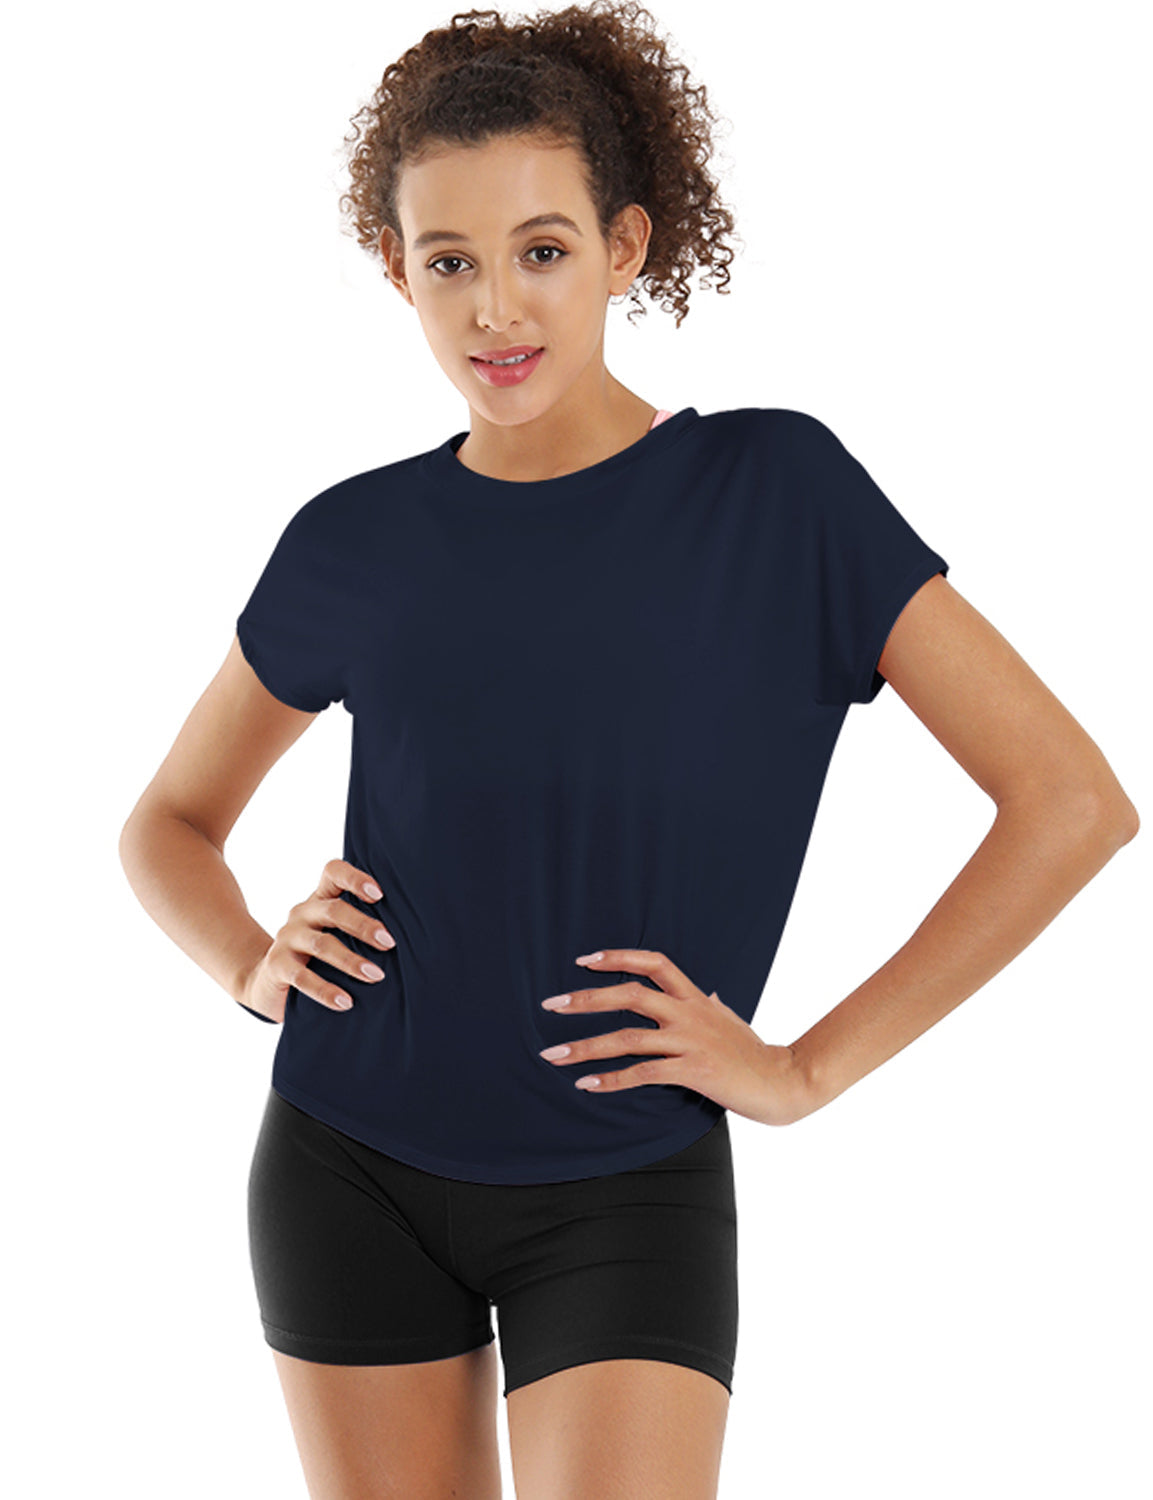 Hip Length Short Sleeve Shirt darknavy 93%Modal/7%Spandex Designed for Running Classic Fit, Hip Length An easy fit that floats away from your body Sits below the waistband for moderate, everyday coverage Lightweight, elastic, strong fabric for moisture absorption and perspiration, sports and fitness clothing.